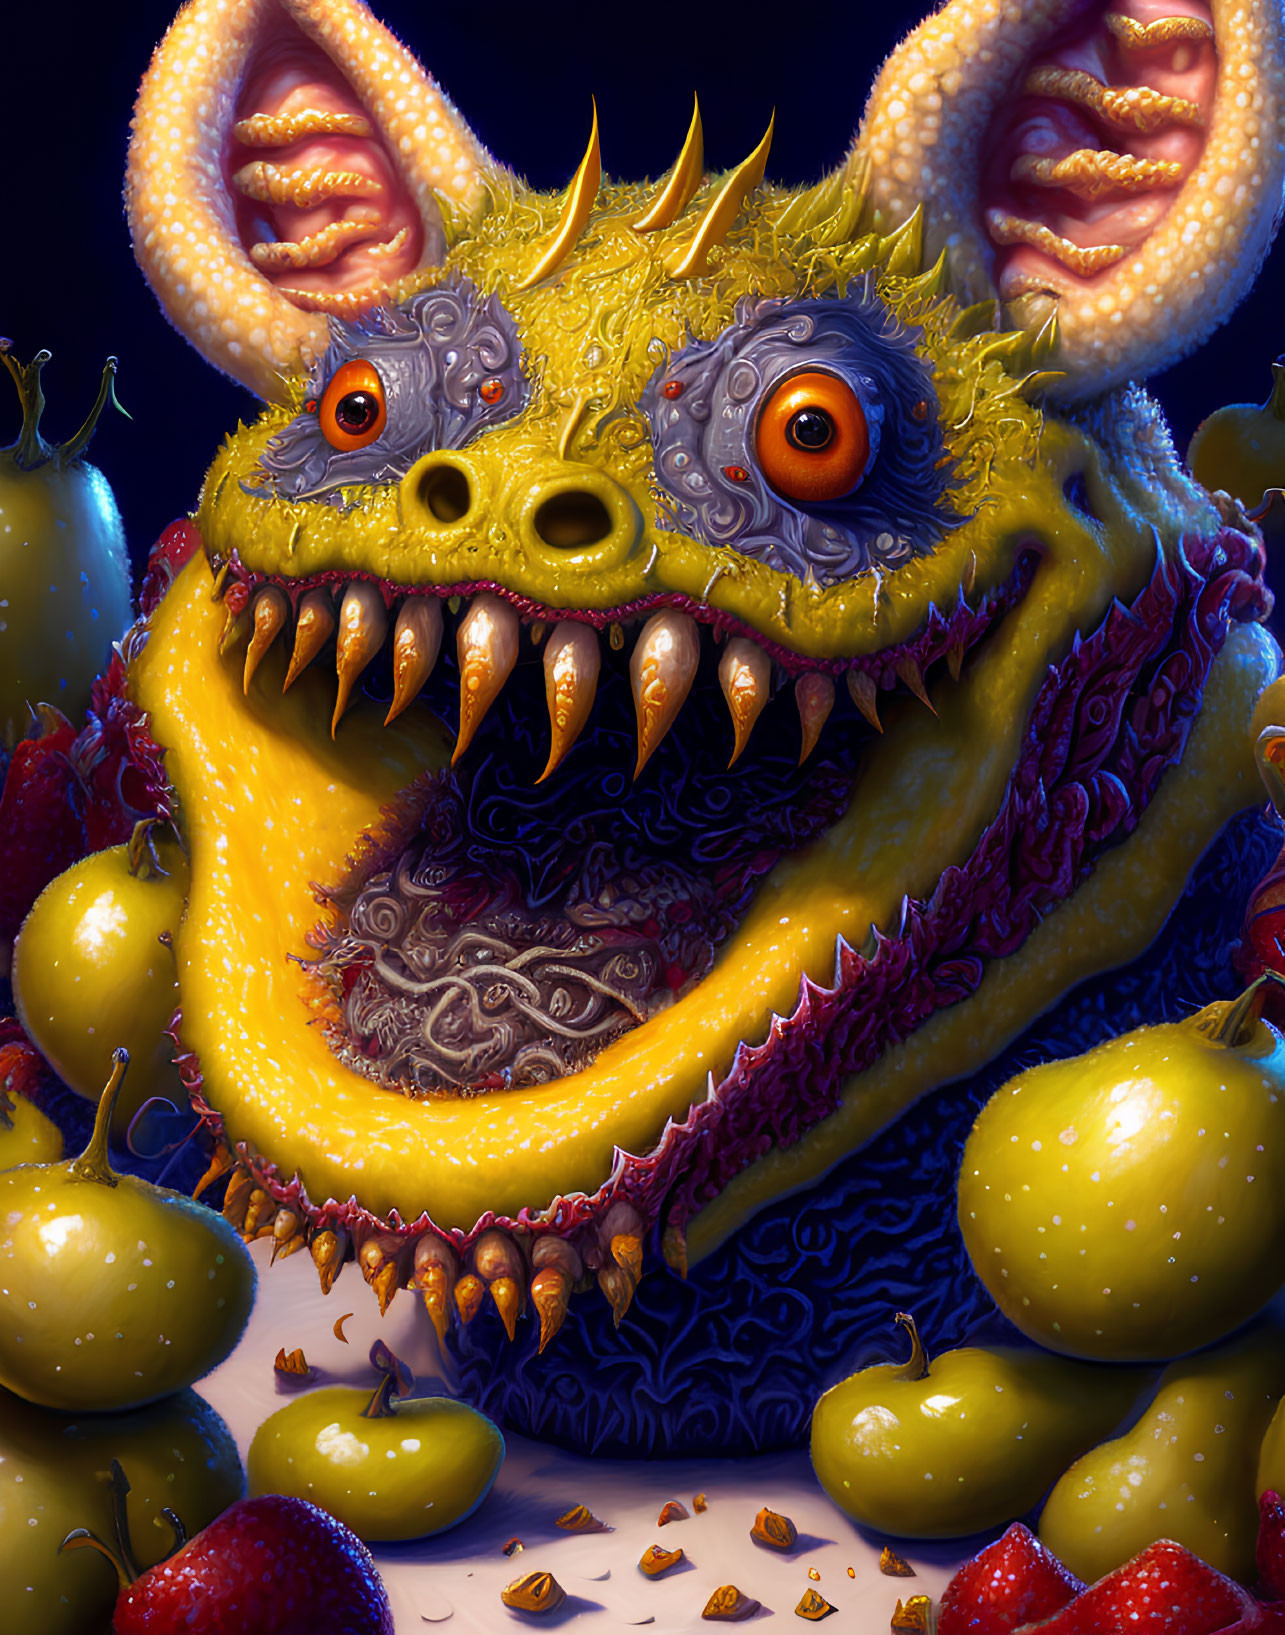 Colorful digital artwork of whimsical creature with orange eyes, yellow fur, sharp teeth, mouse-like